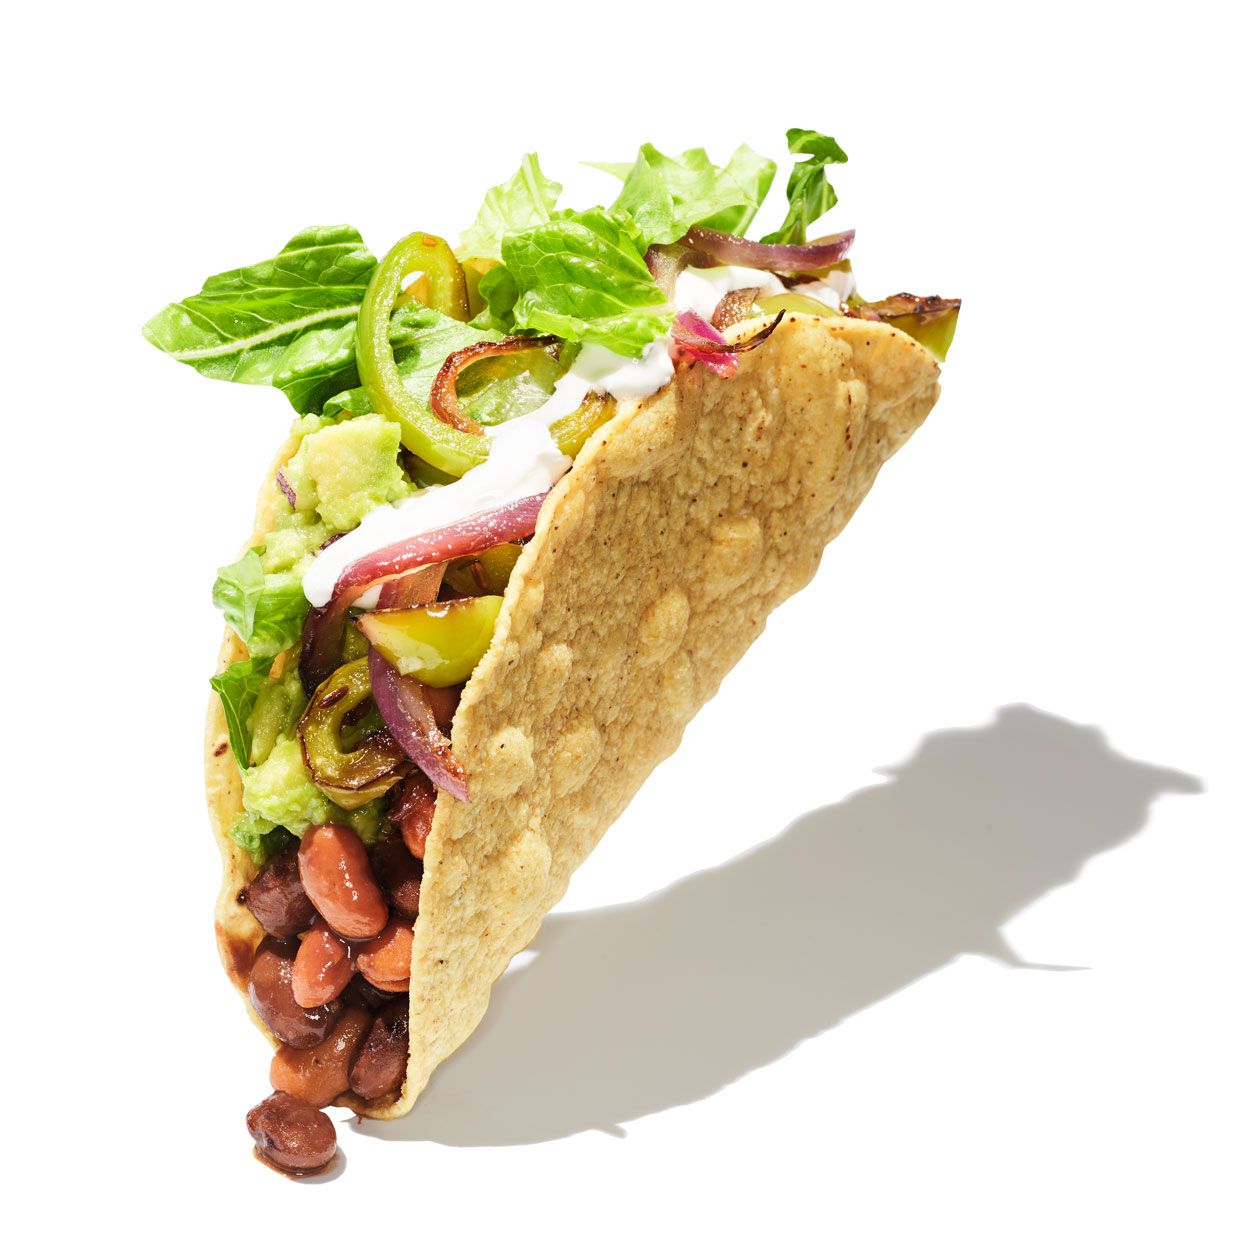 chipotle taco on white background with beans and vegetables